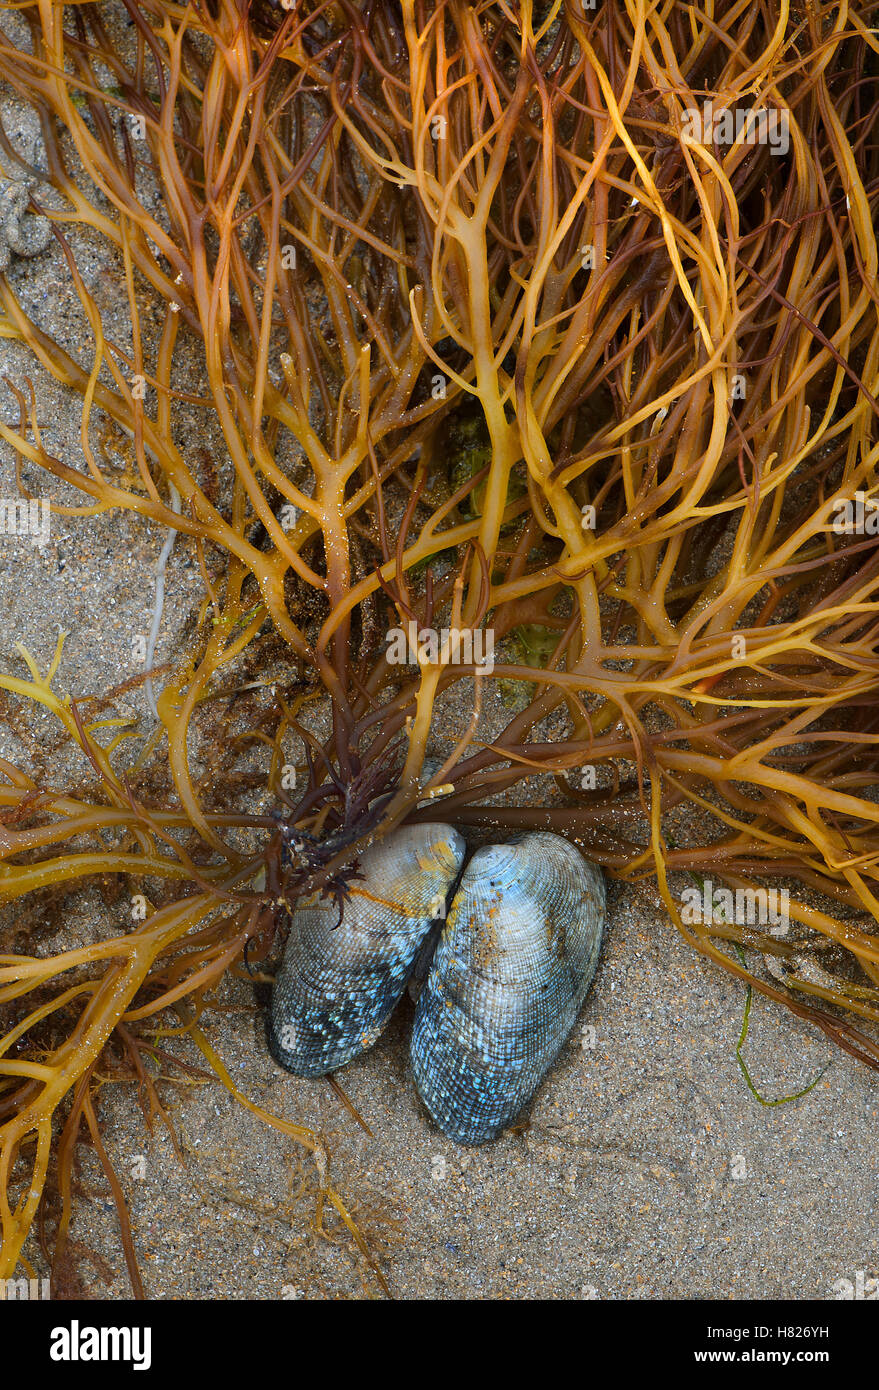 Mussel shell and seaweed, Etretat, Upper Normandy, France Stock Photo